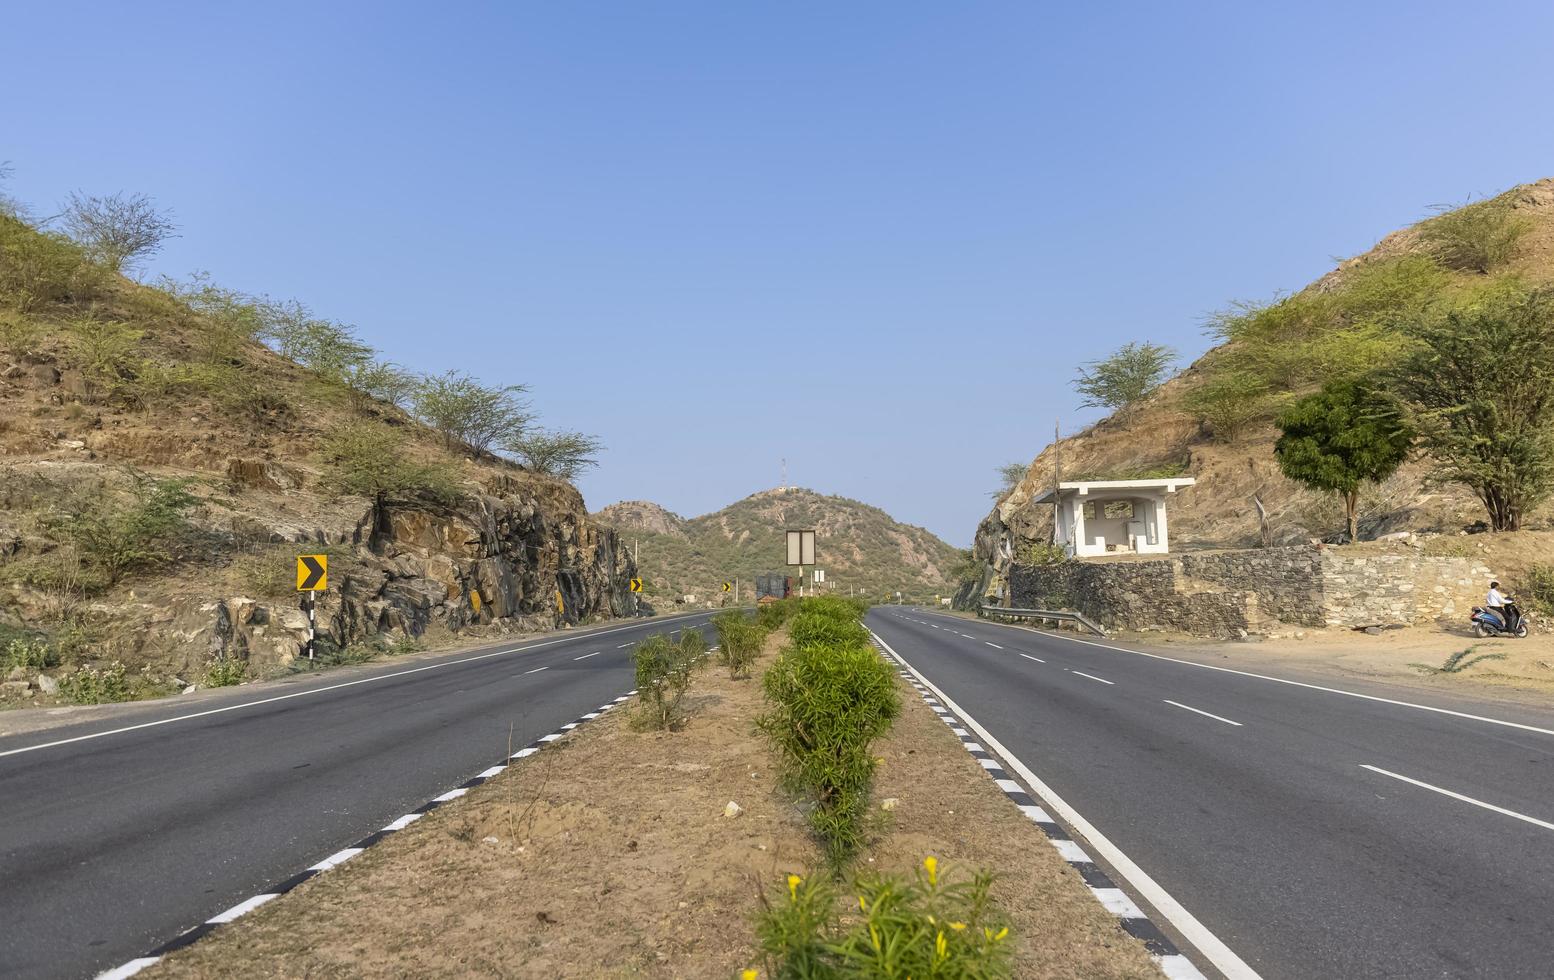 Indian National Highway, Landscape of Indian roads on Jodhpur Ajmer national highway with aravali mountains. photo